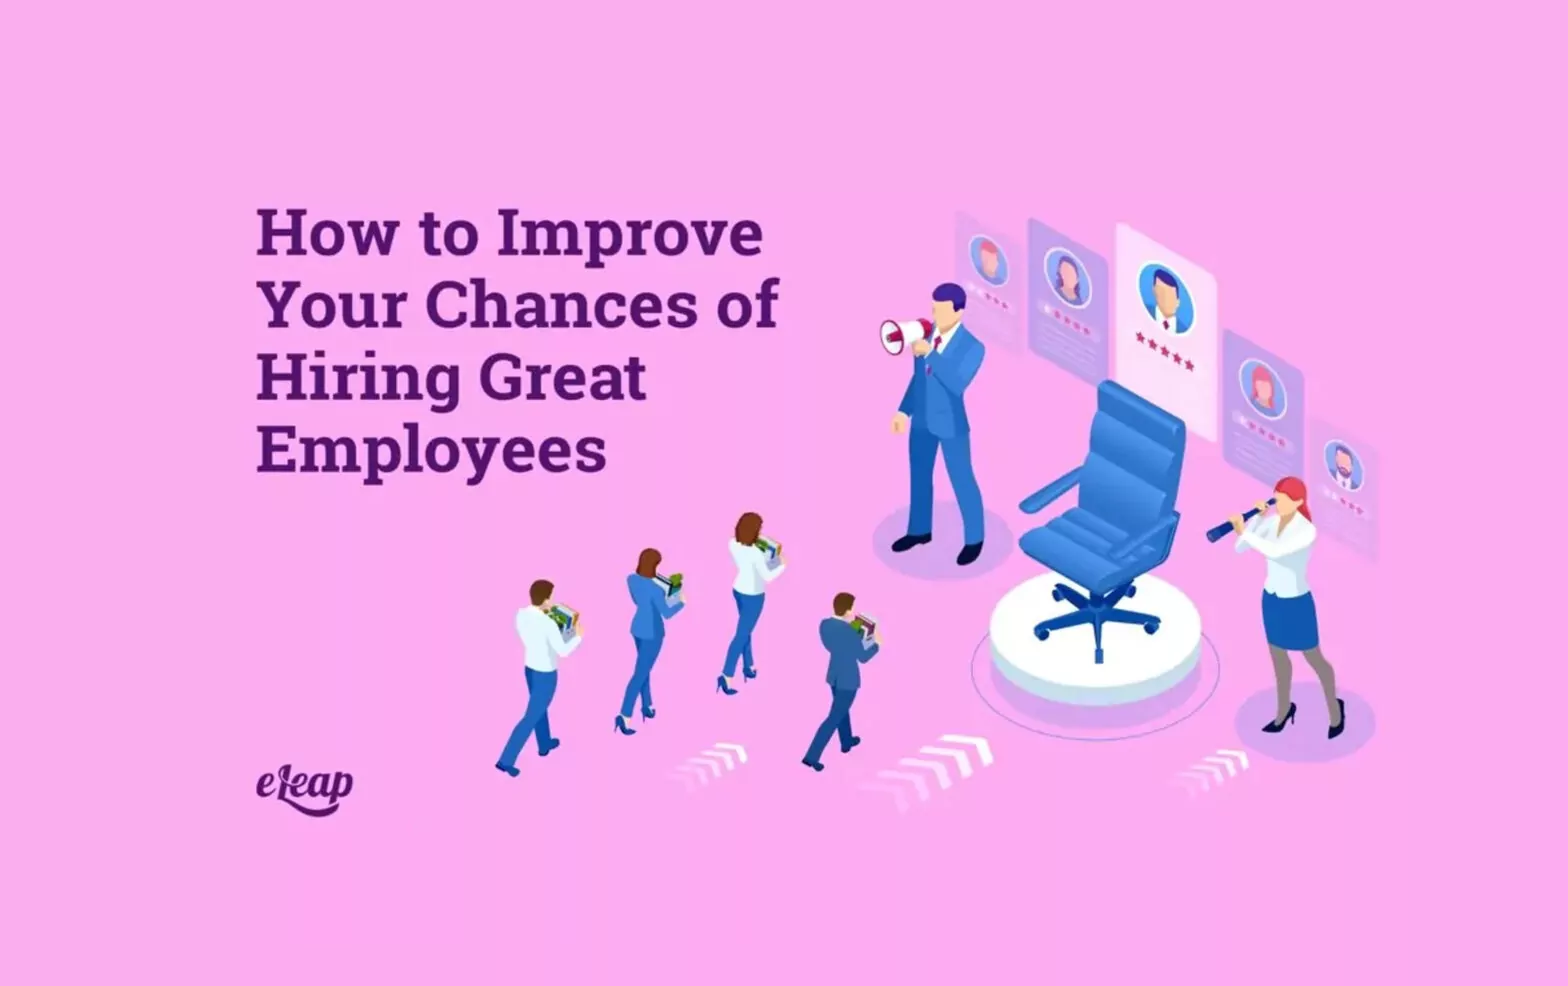 How to Improve Your Chances of Hiring Great Employees